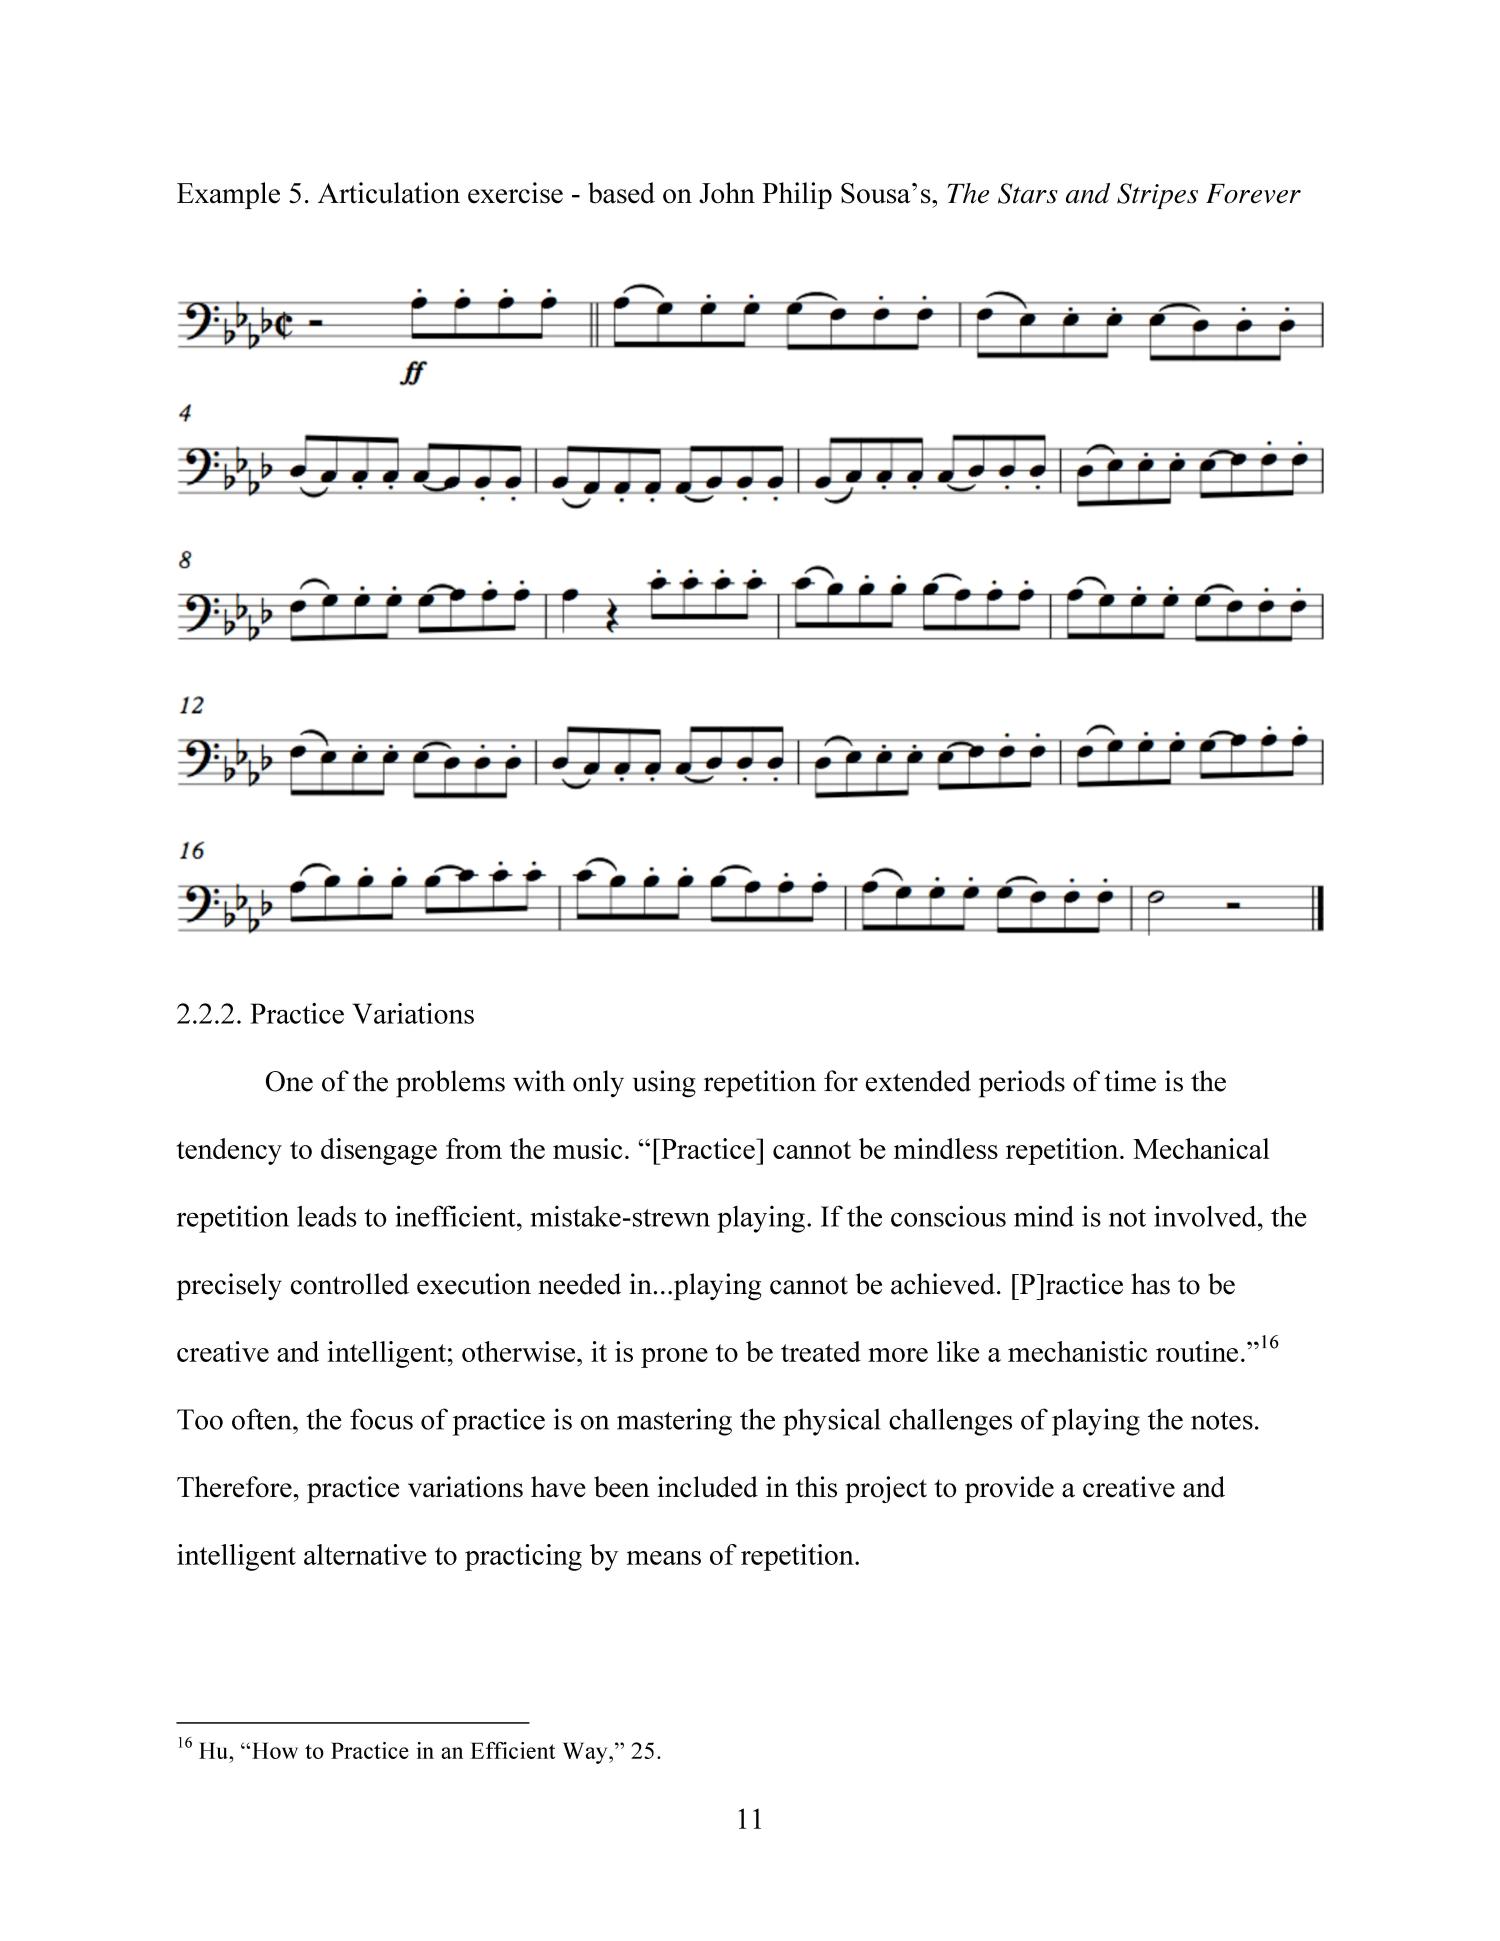 Preparing selected wind band euphonium audition materials through the use of etudes
                                                
                                                    11
                                                